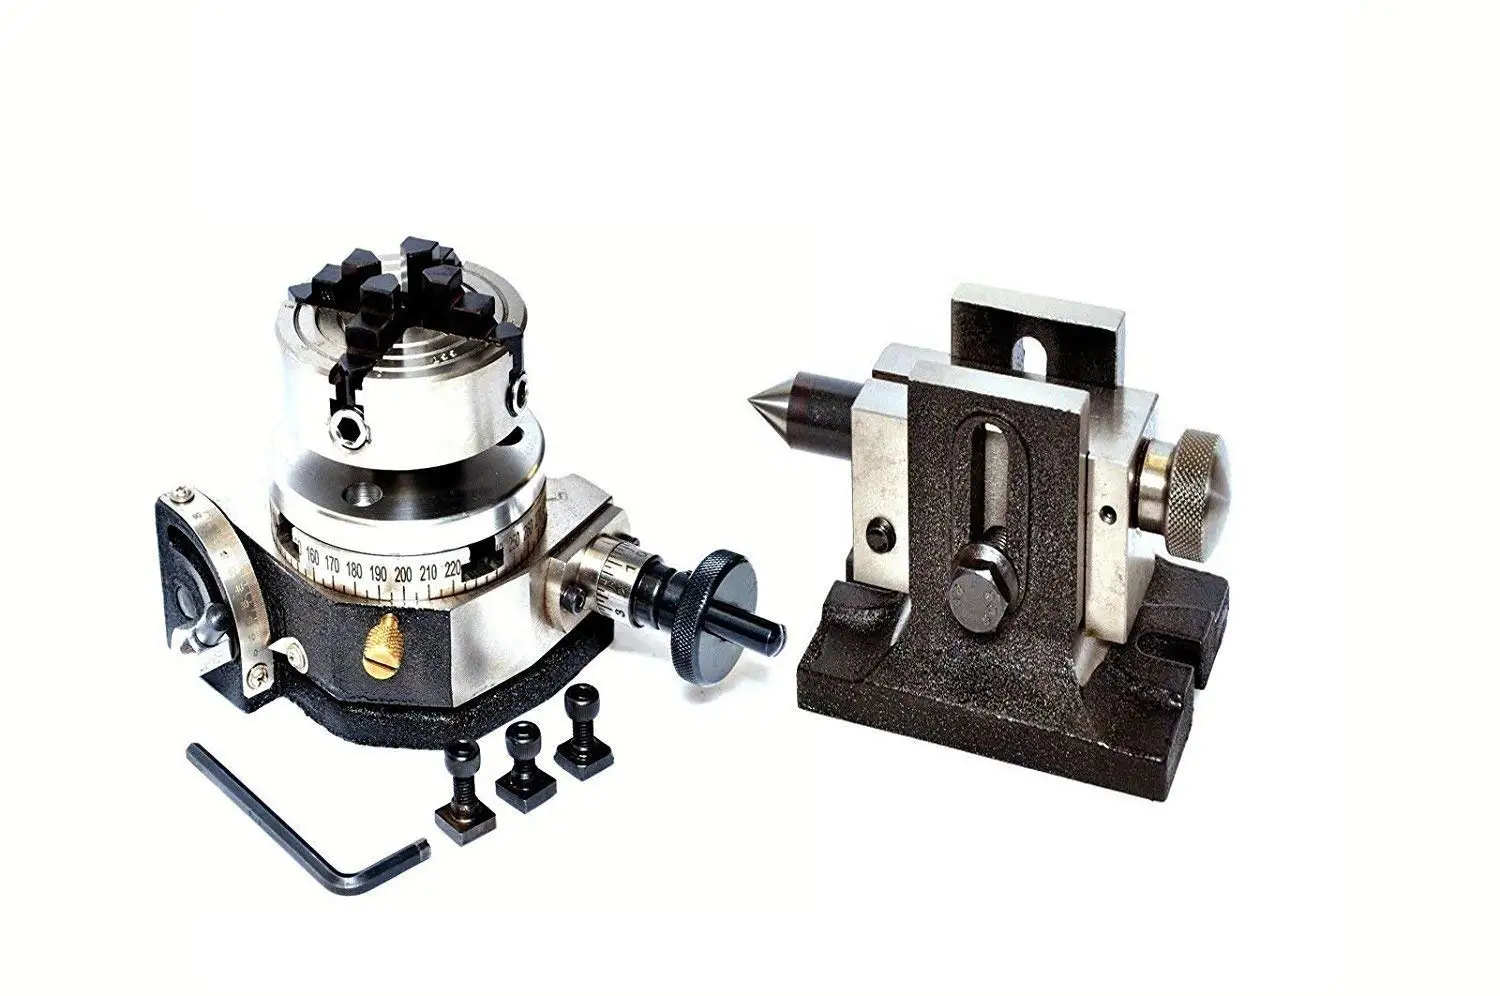 TAILSTOCK+ER16 & ER20 ADAPTOR 3"/80MM TILTING ROTARY INDEXING TABLE 